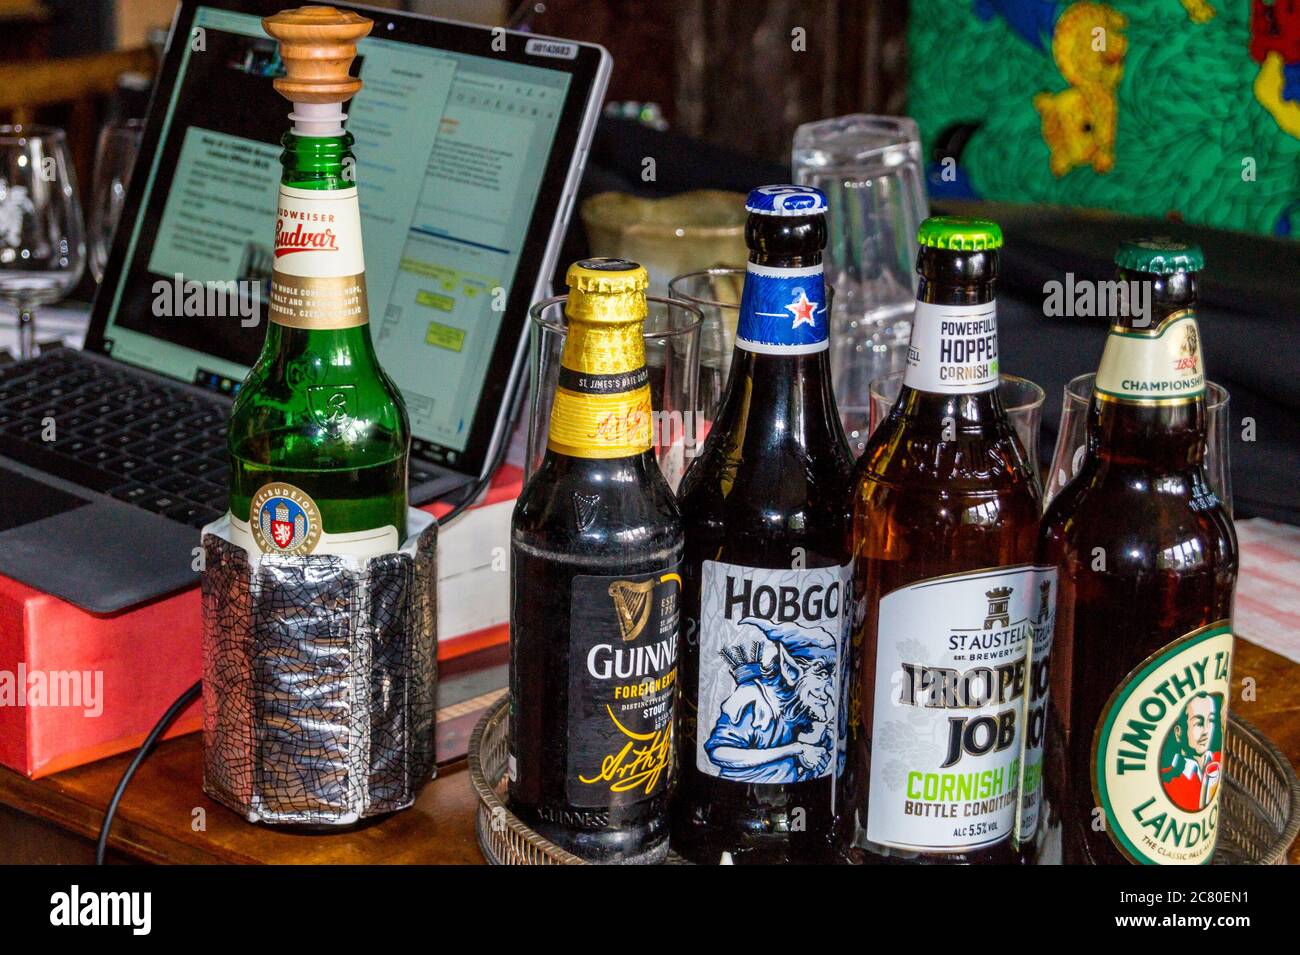 PHOTOGRAPH Bottles of beer on a dining table selected for an online CAMRA beer tasting event during Covid-19 pandemic Stock Photo